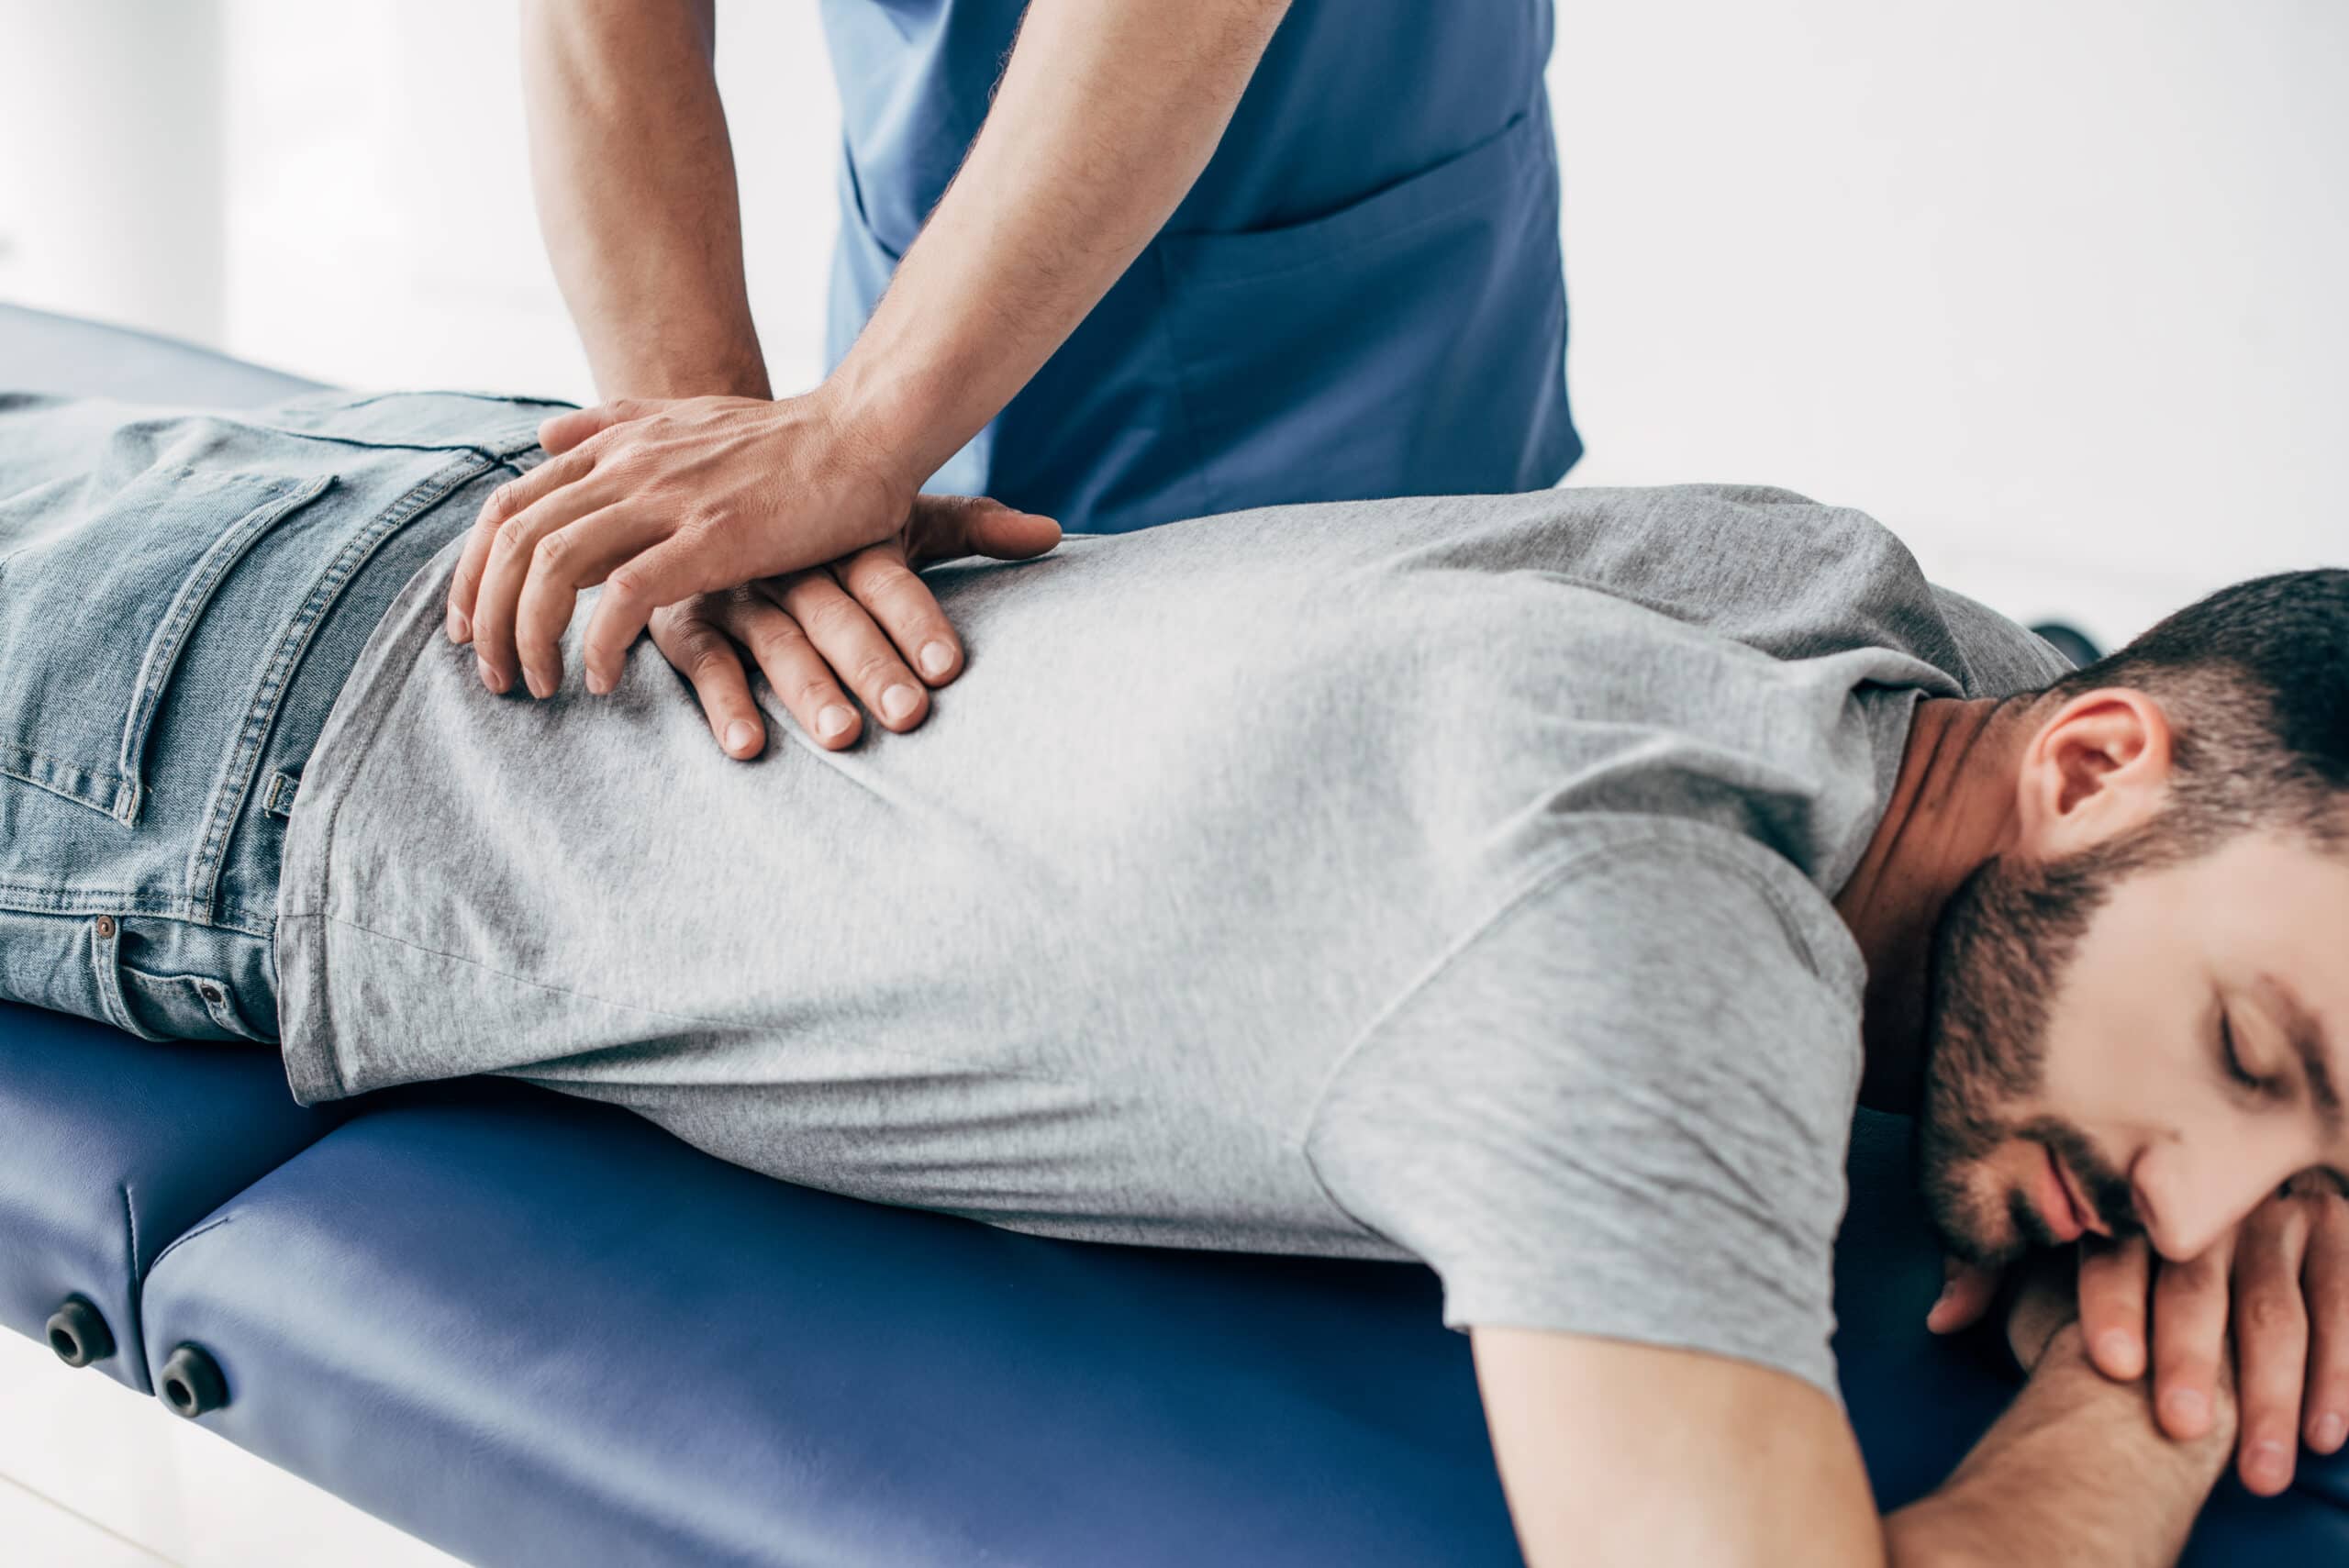 How Can Chiropractic Adjustments Alleviate Lower Back Pain?